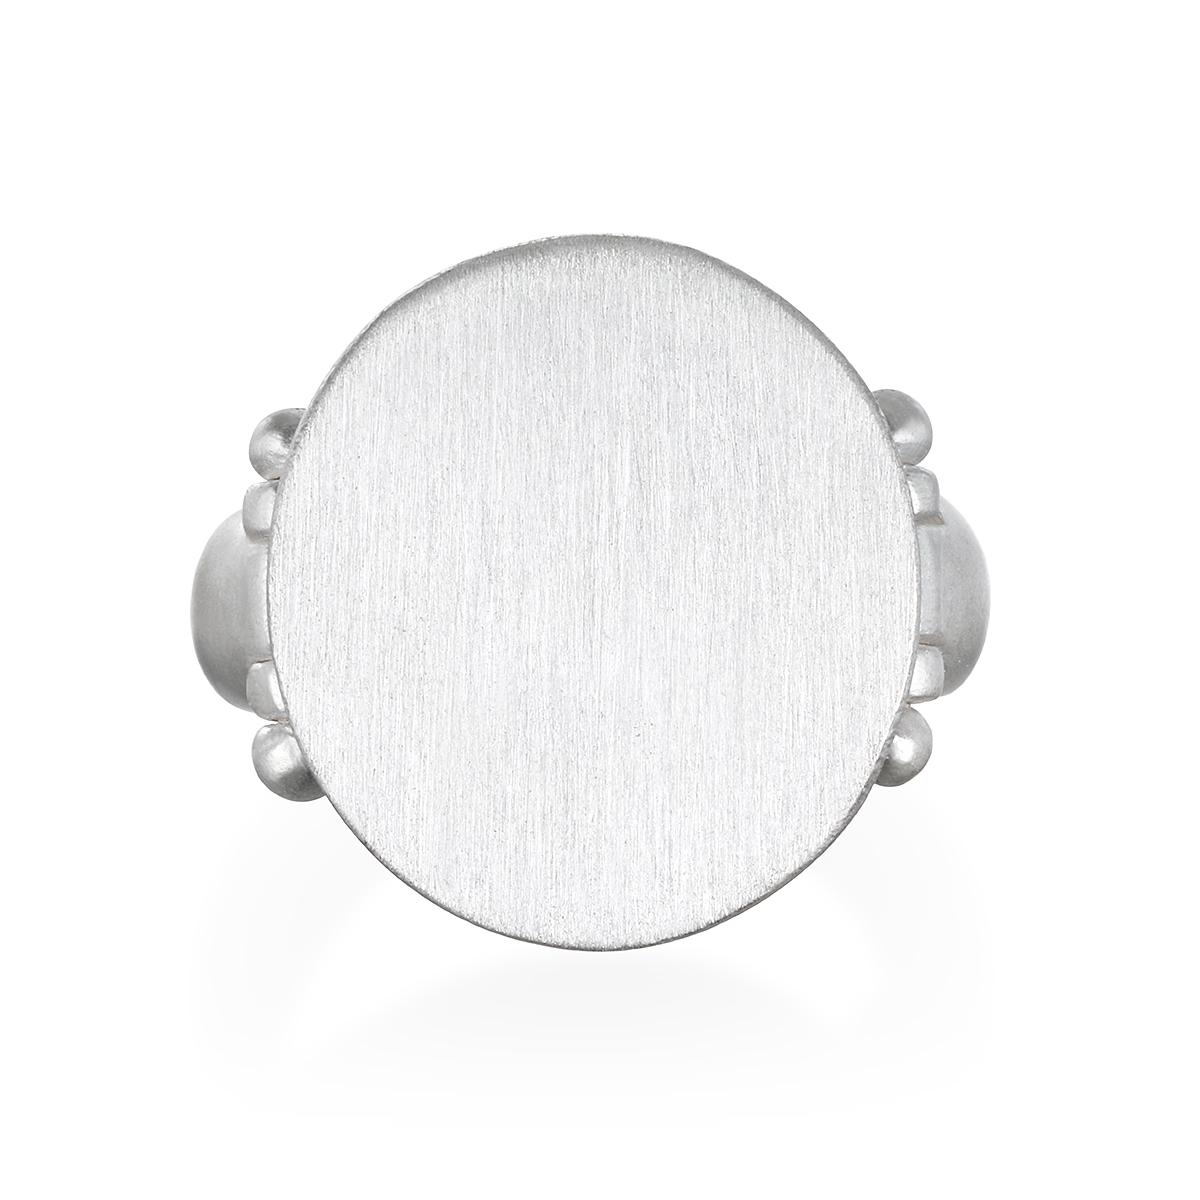 A variation of the traditional signet ring, Faye Kim's Sterling Silver Signet Ring is oversized and chunky in feel with her signature granulation hinge detail. Great worn your middle or index finger for a non-traditional style.

Sterling Silver,